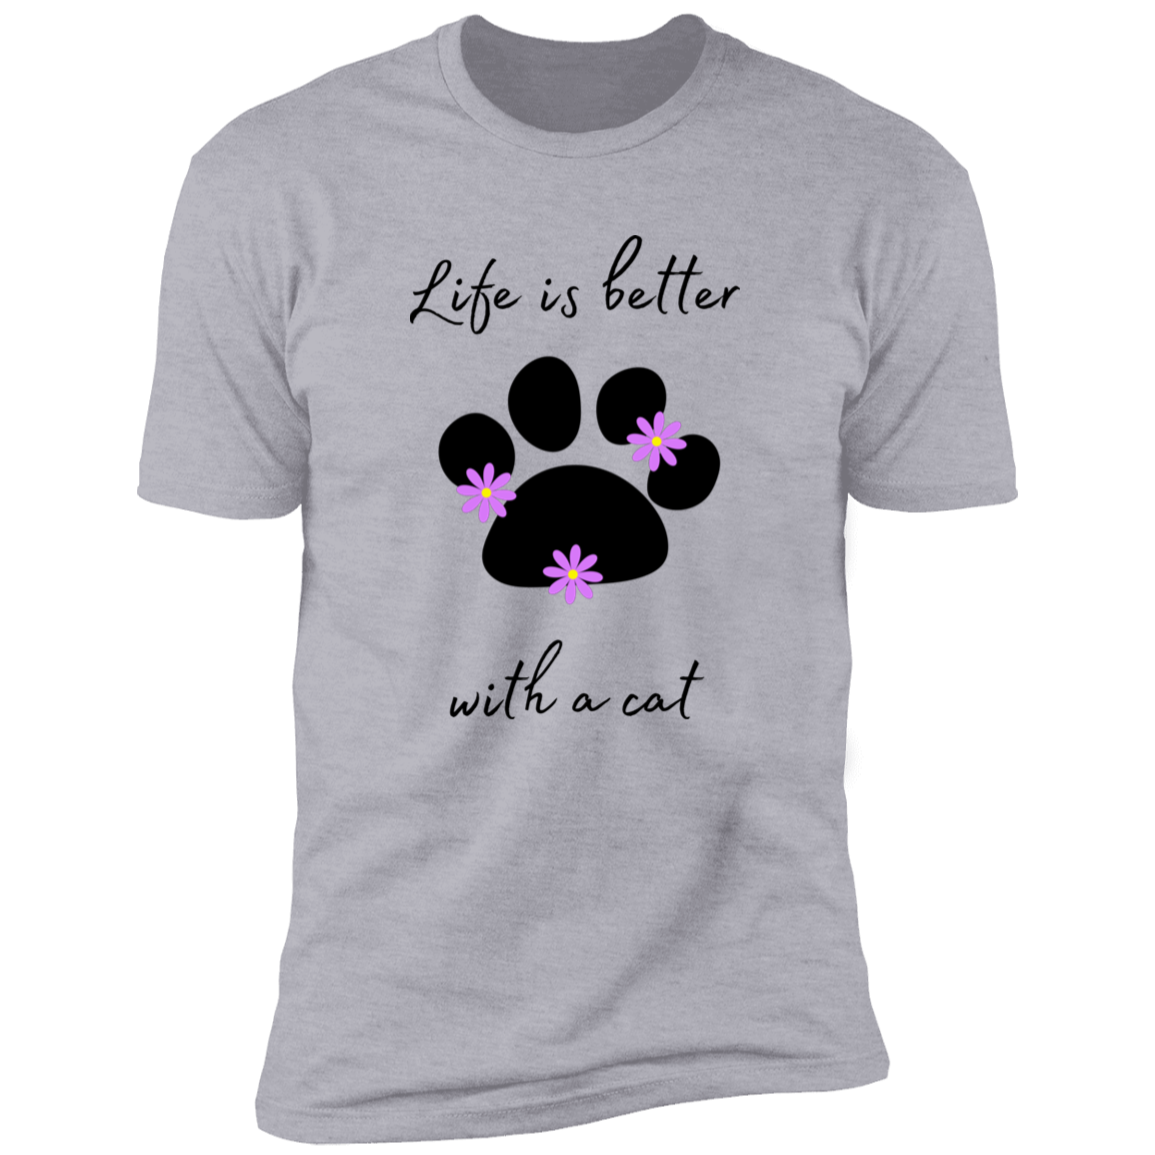 Life is Better with a Cat (Flower) cat t-shirt, cat shirt for humans, cat themed t-shirt, in heather gray